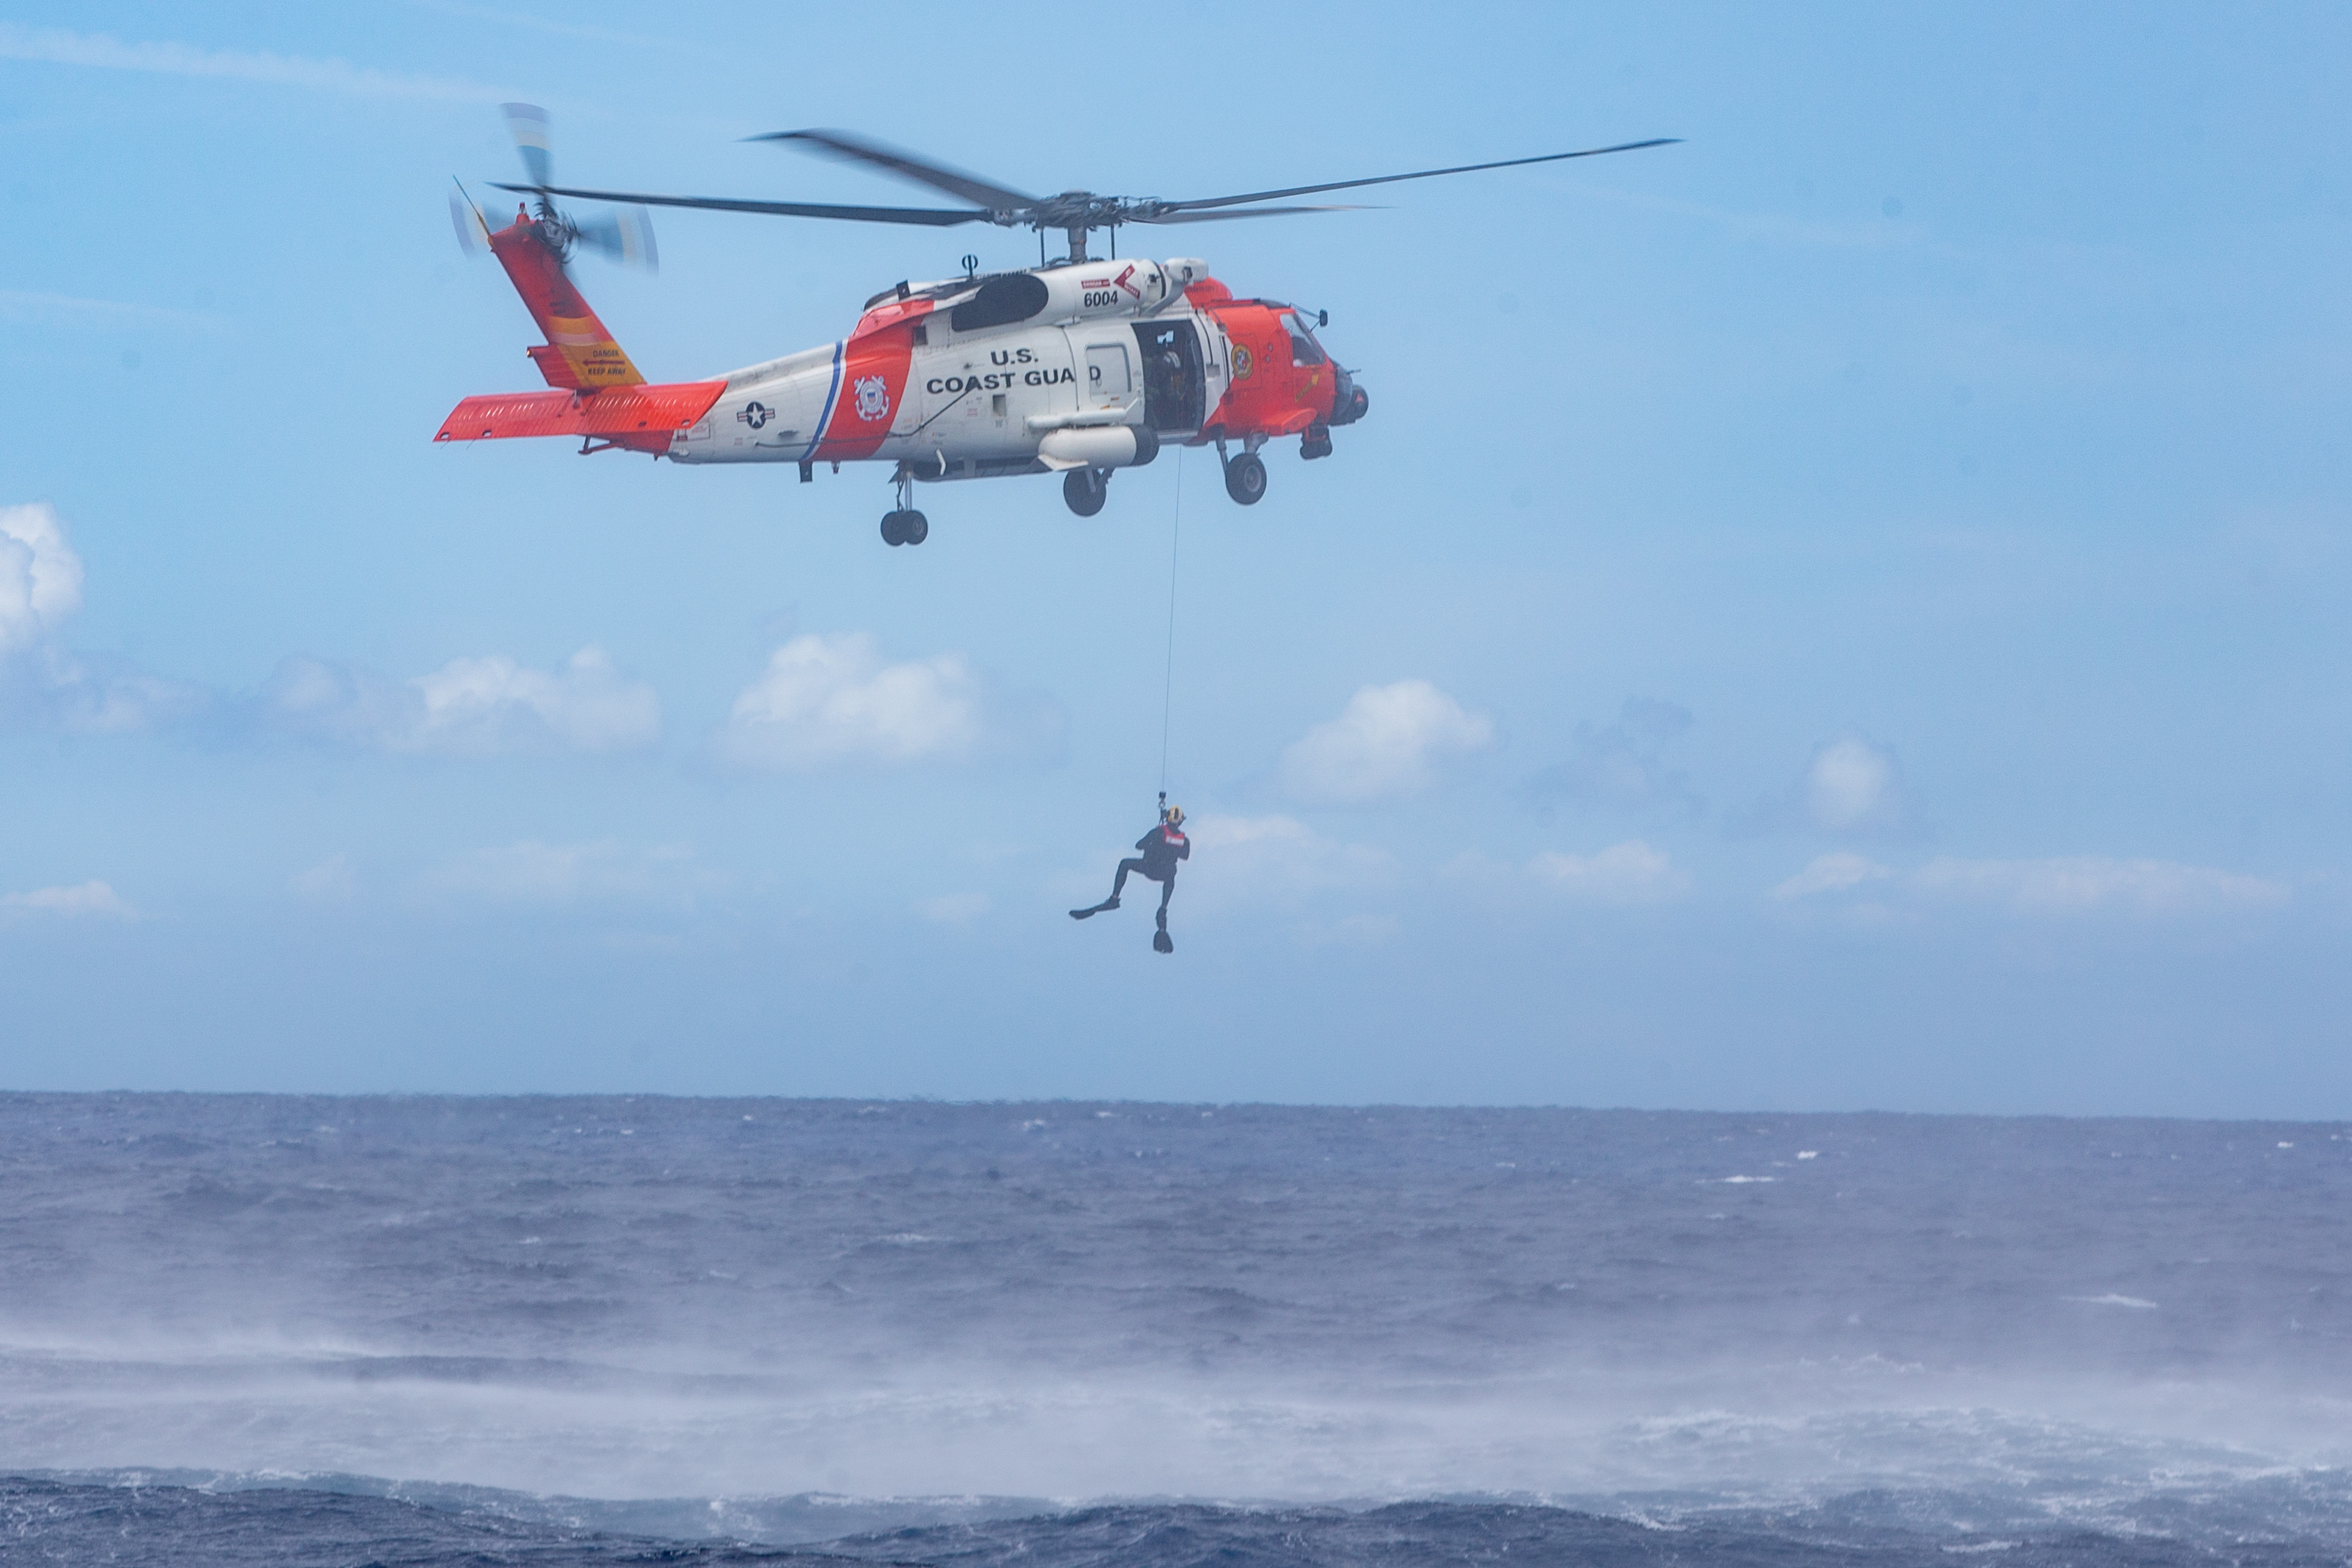 joint-coast-guard-military-search-and-rescue-exercise-in-mid-atlantic